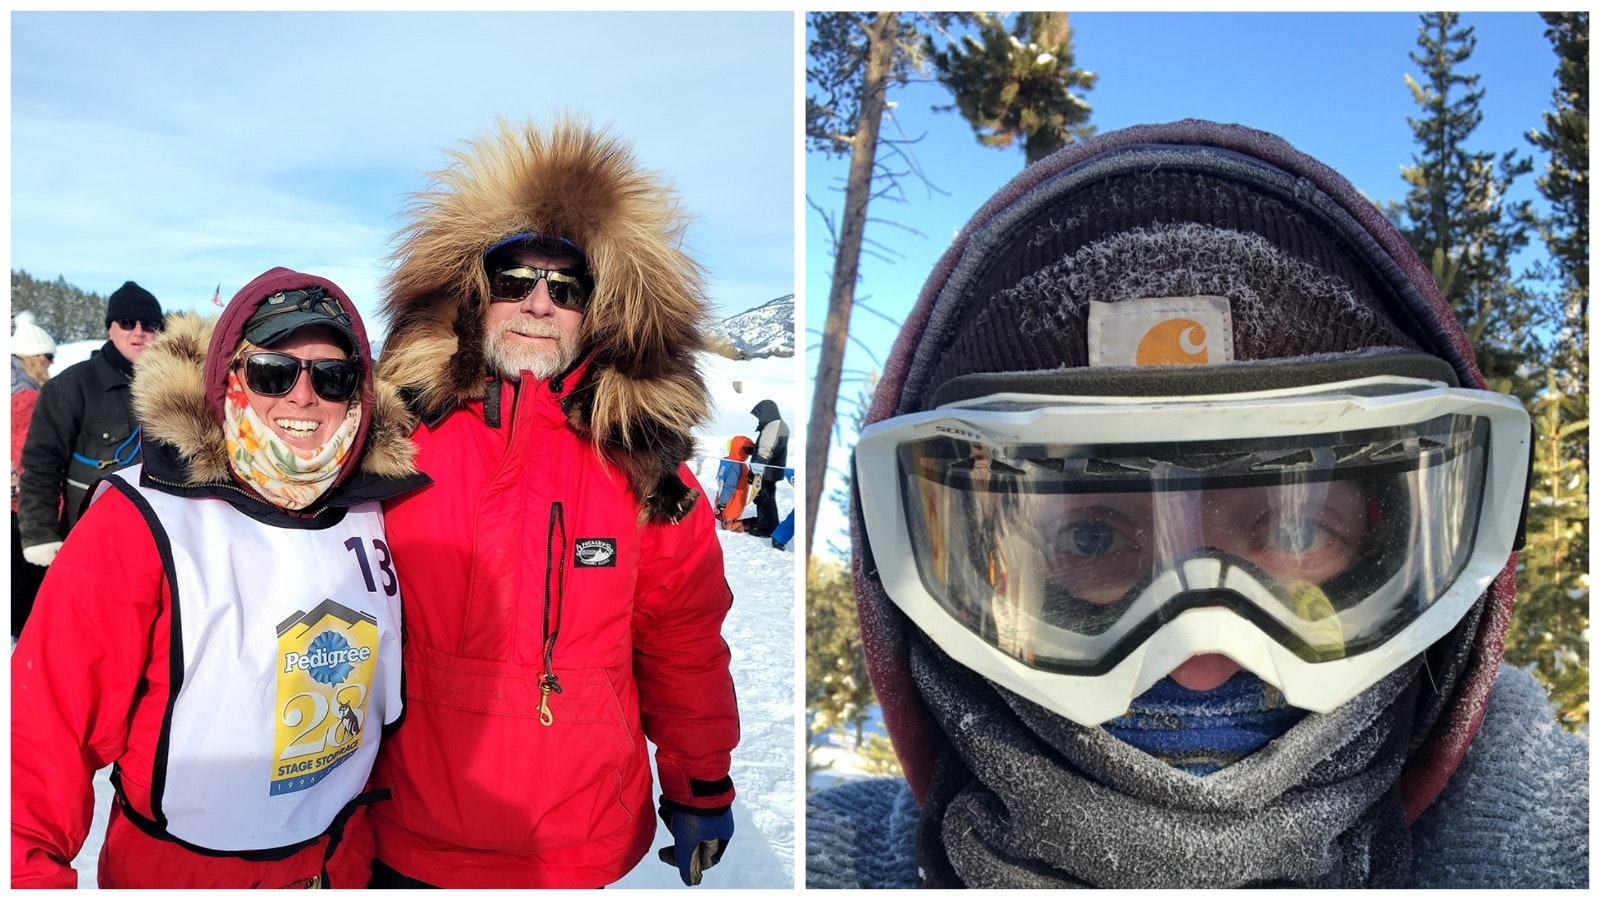 At left: Alix Crittenden, left, with race founder and team owner Frank Teasley. Right: Jess Moore masked up in the cold.